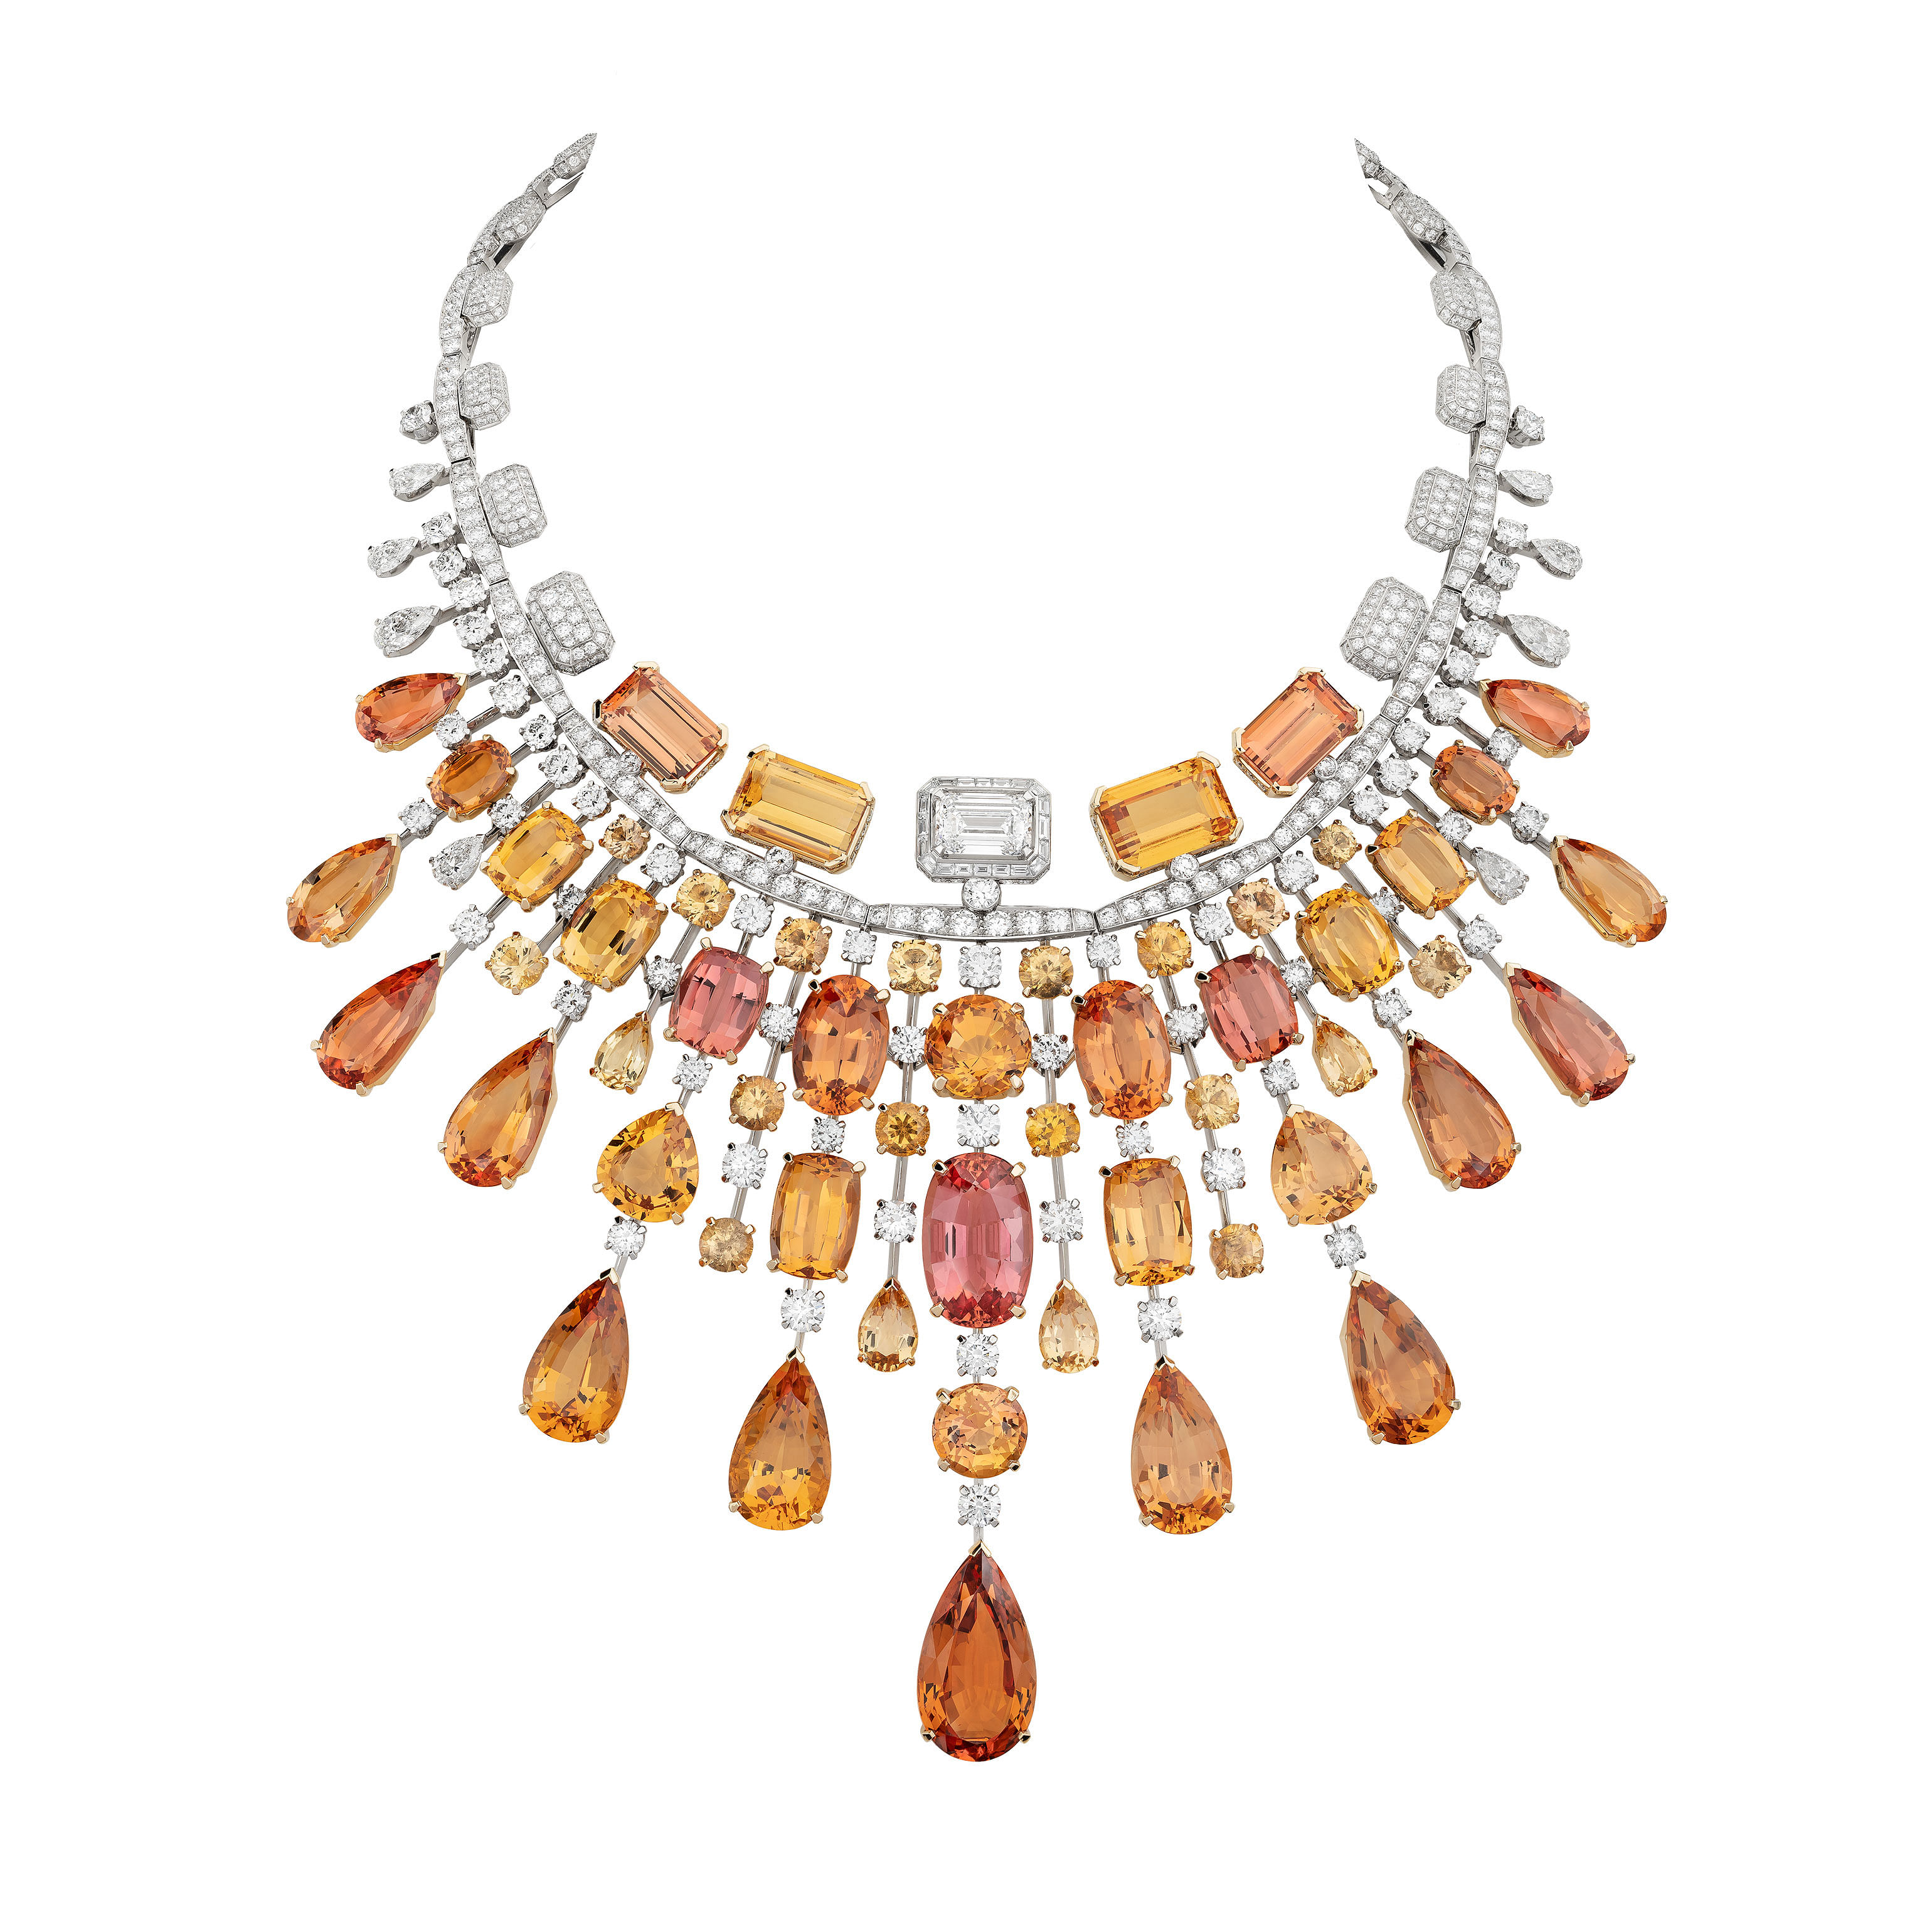 Stunning High Jewelry from Chanel, Cartier and Others Debuts in